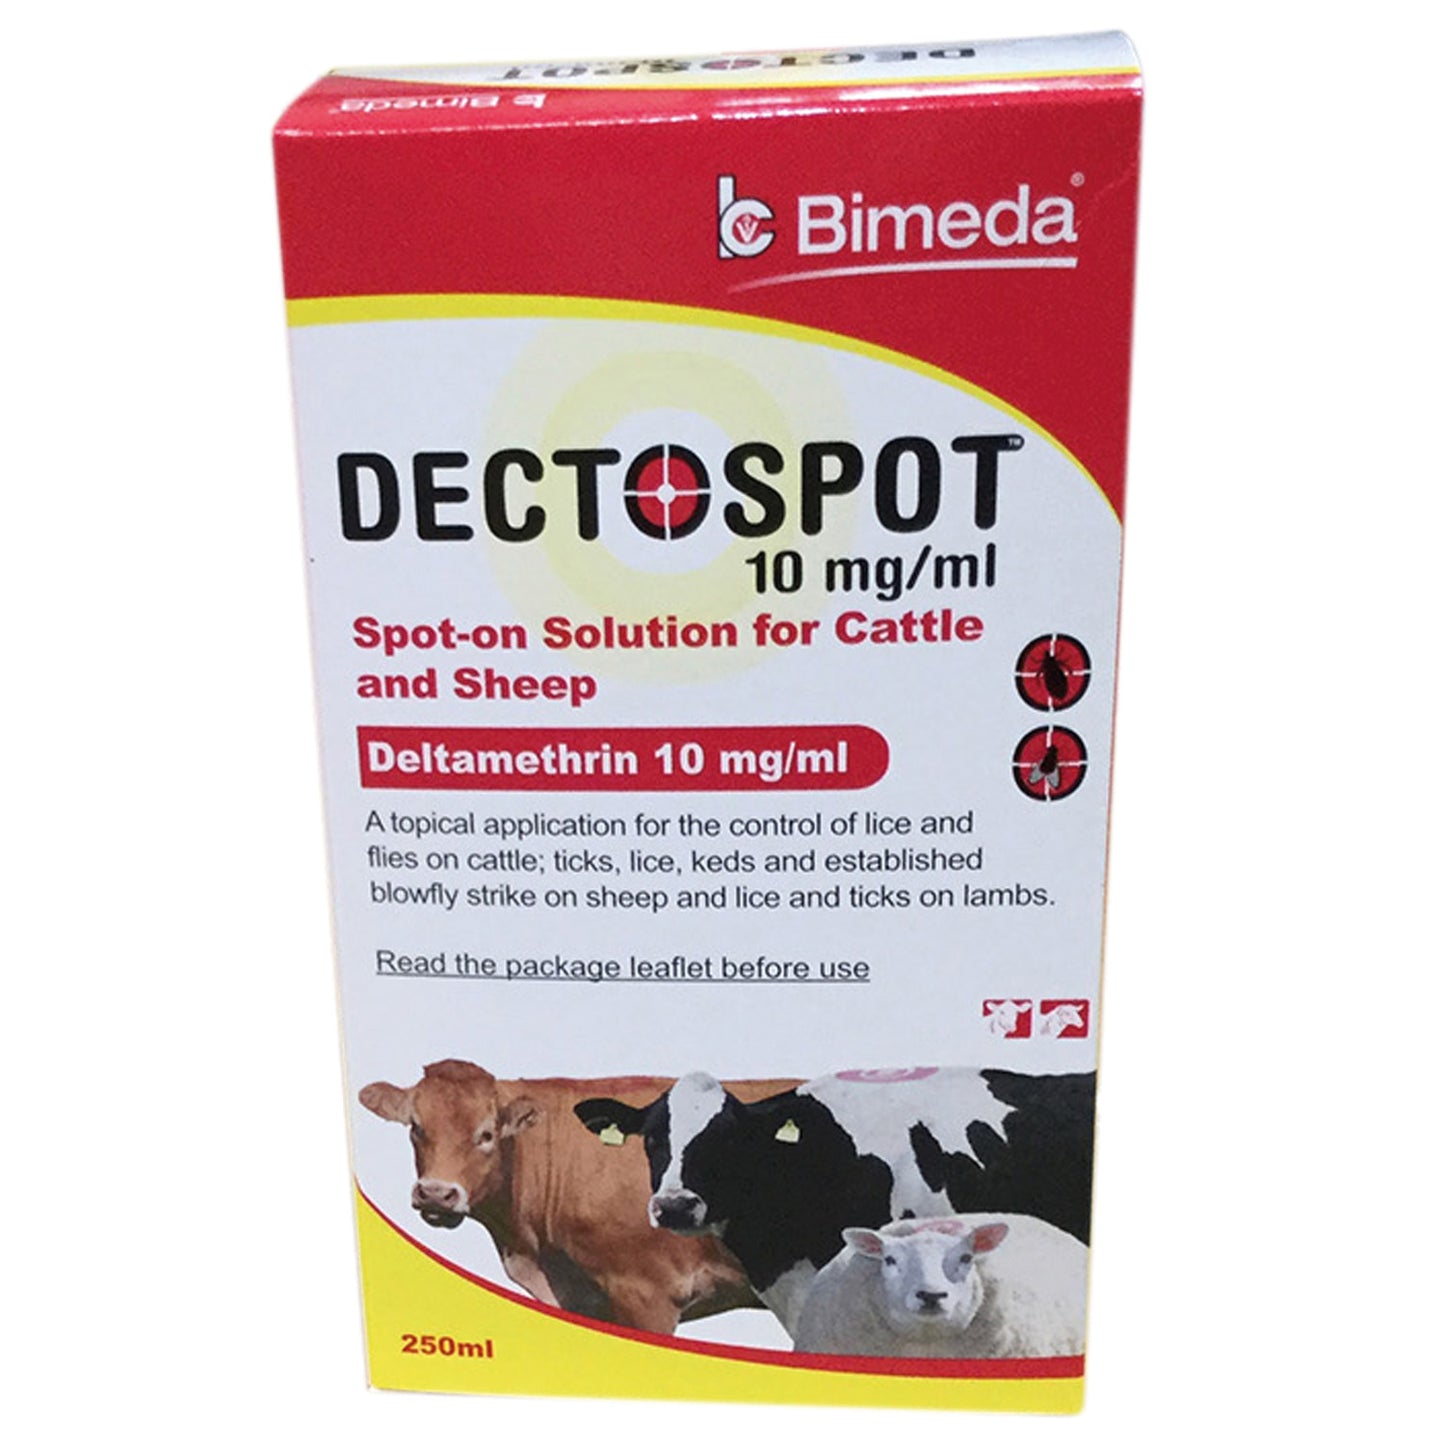 Dectospot 10 mg/ml Spot-on Solution for Cattle & Sheep